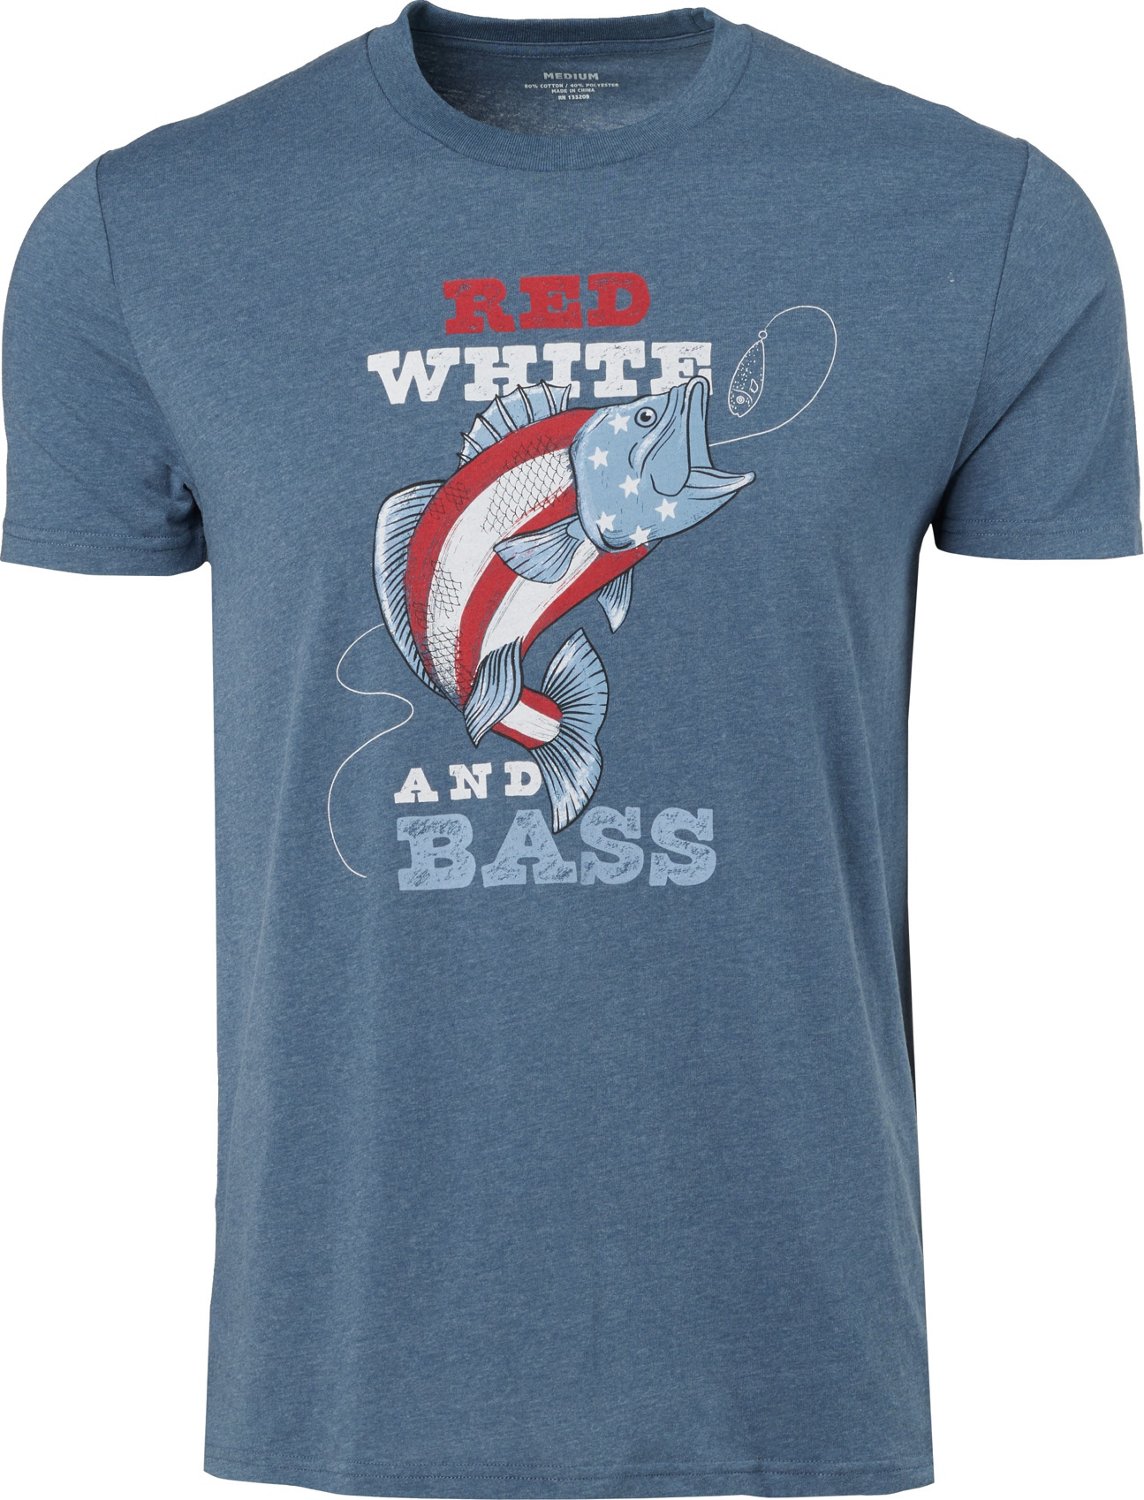 Academy Sports + Outdoors Men's Americana Red White and Bass T-shirt